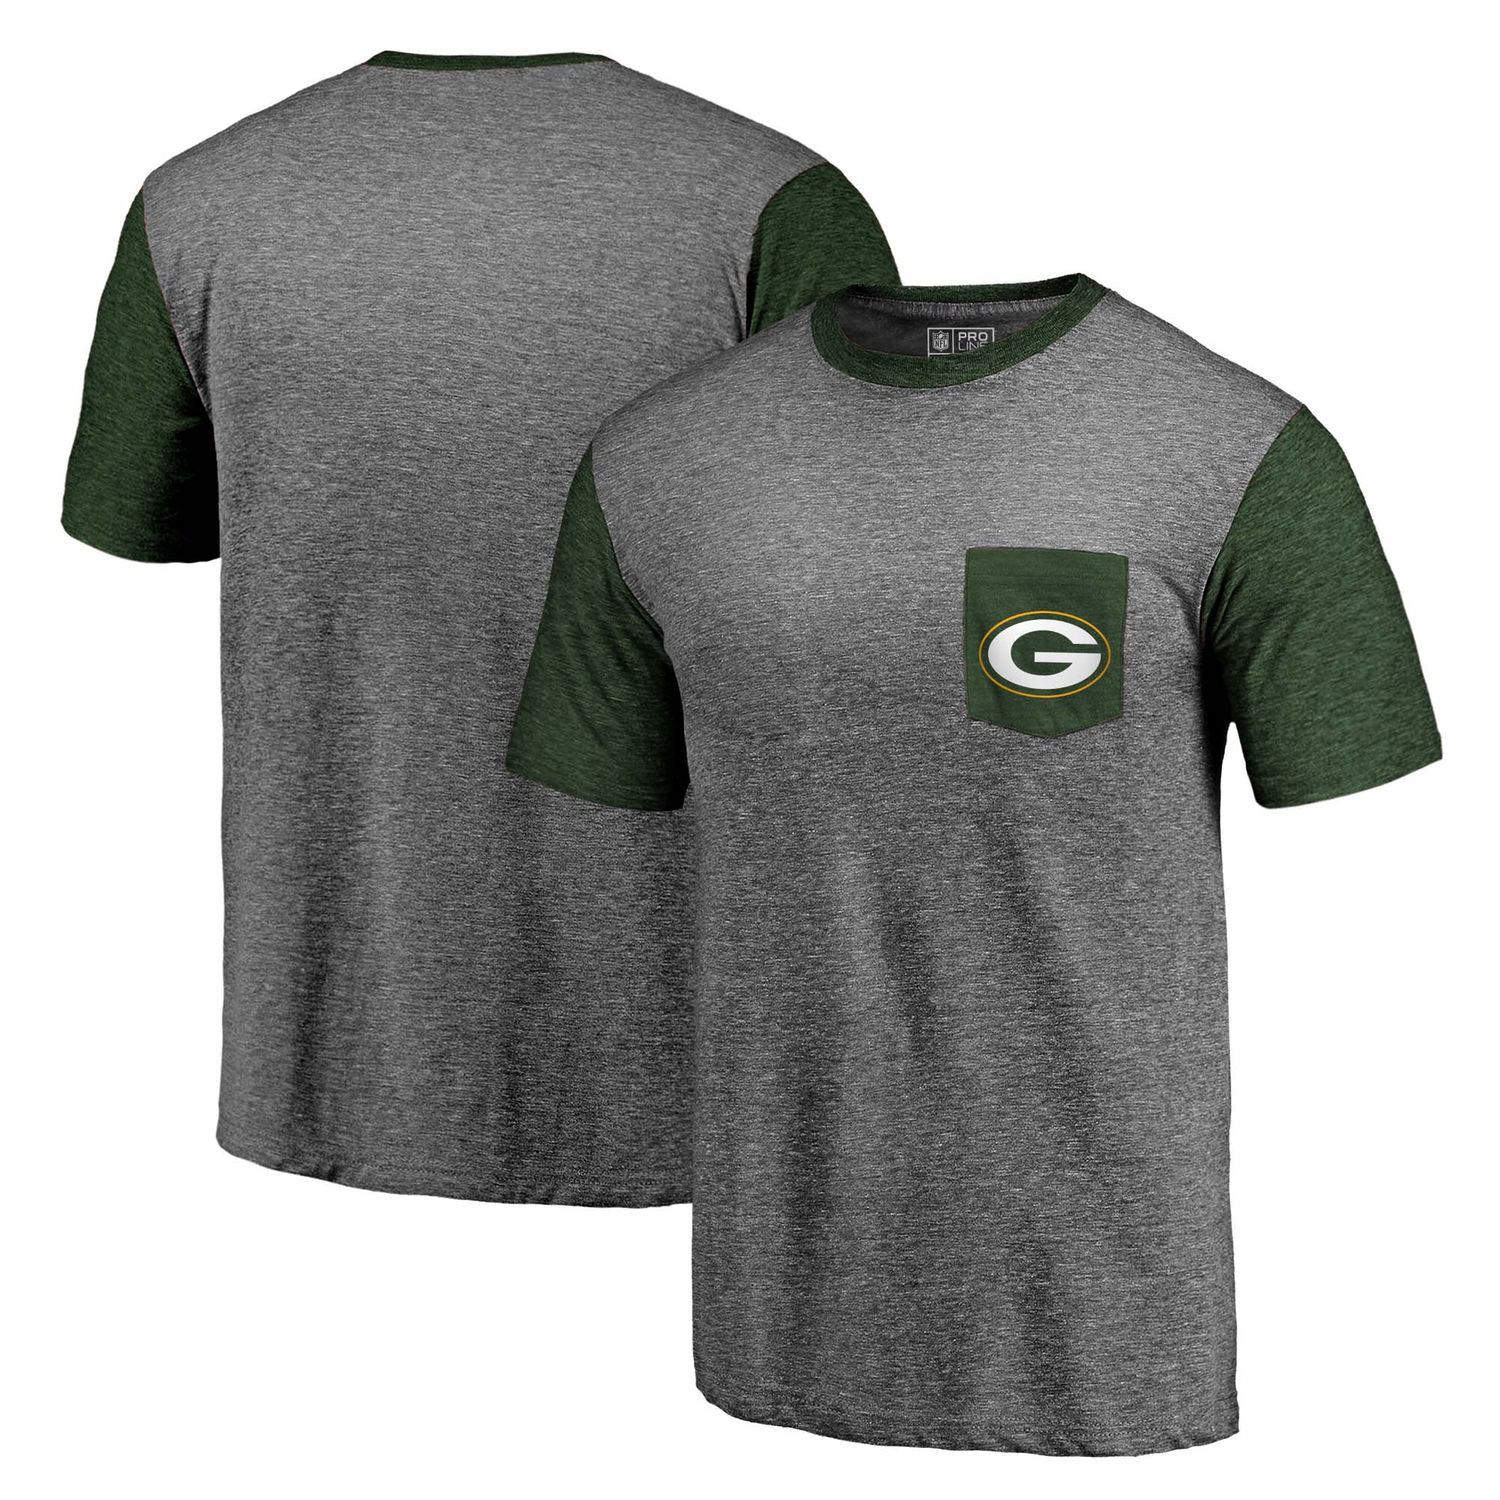 Men's Green Bay Packers NFL Pro Line by Fanatics Branded Heathered Gray-Green Refresh Pocket T-Shirt